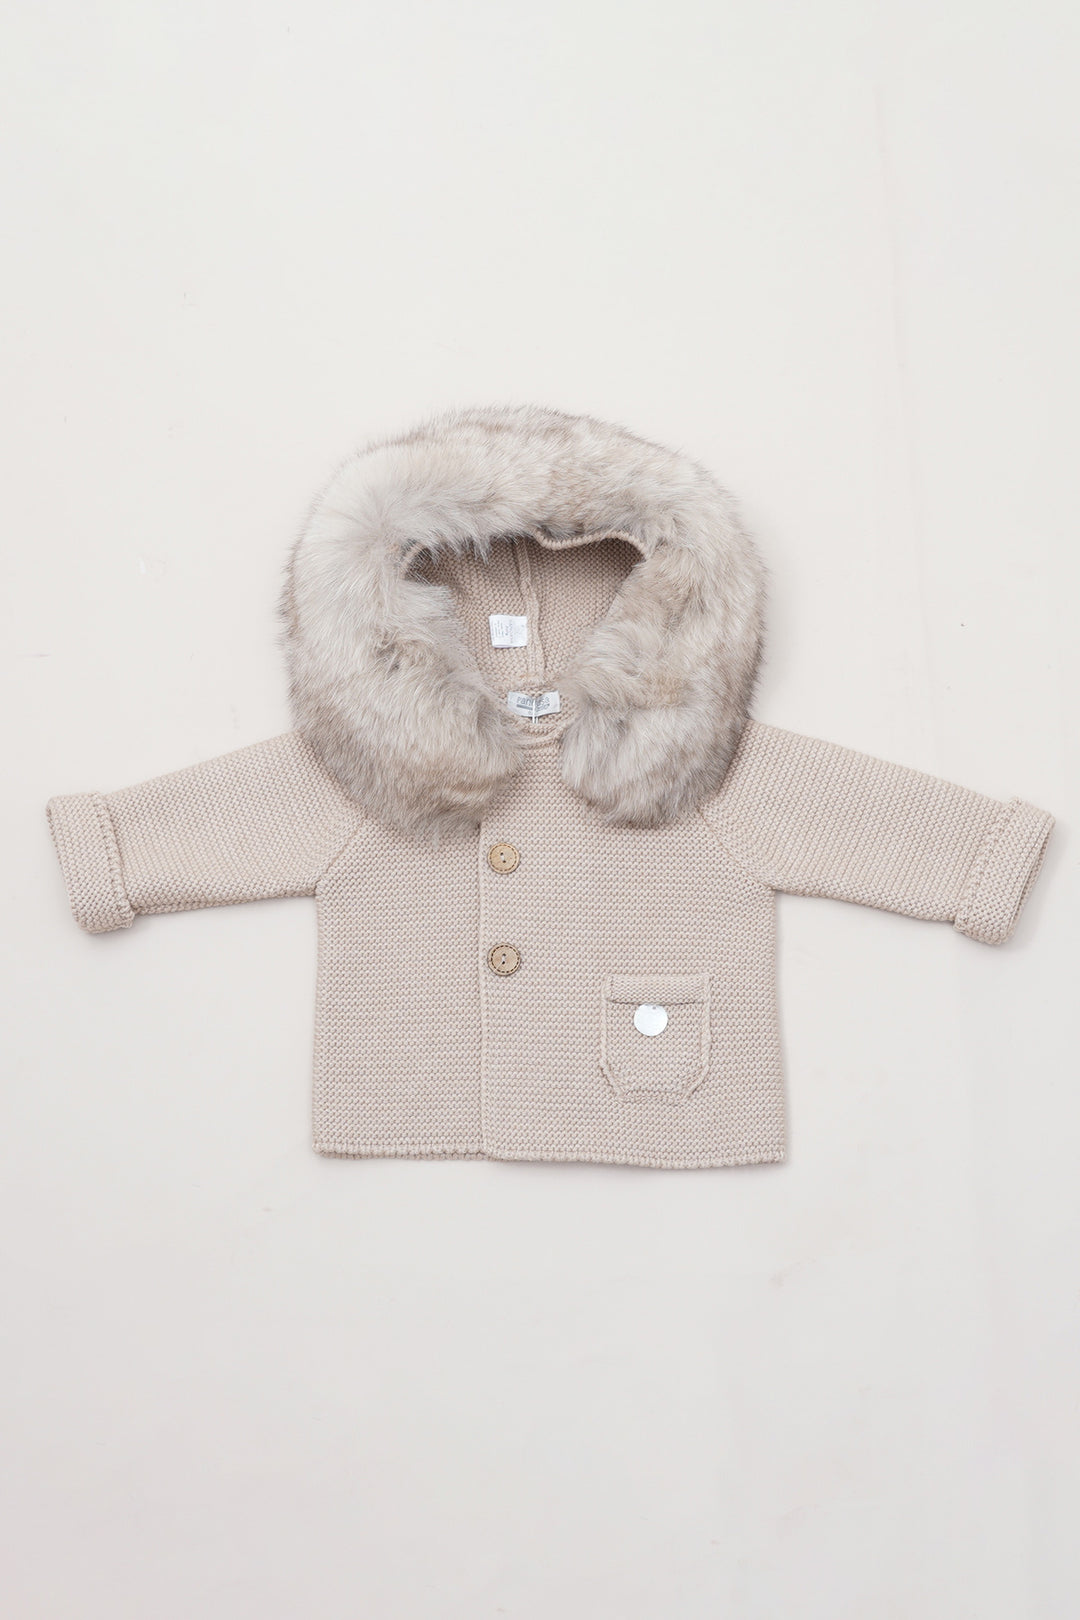 Pangasa AW23 PREORDER Sand Faux Fur Knitted Jacket | iphoneandroidapplications